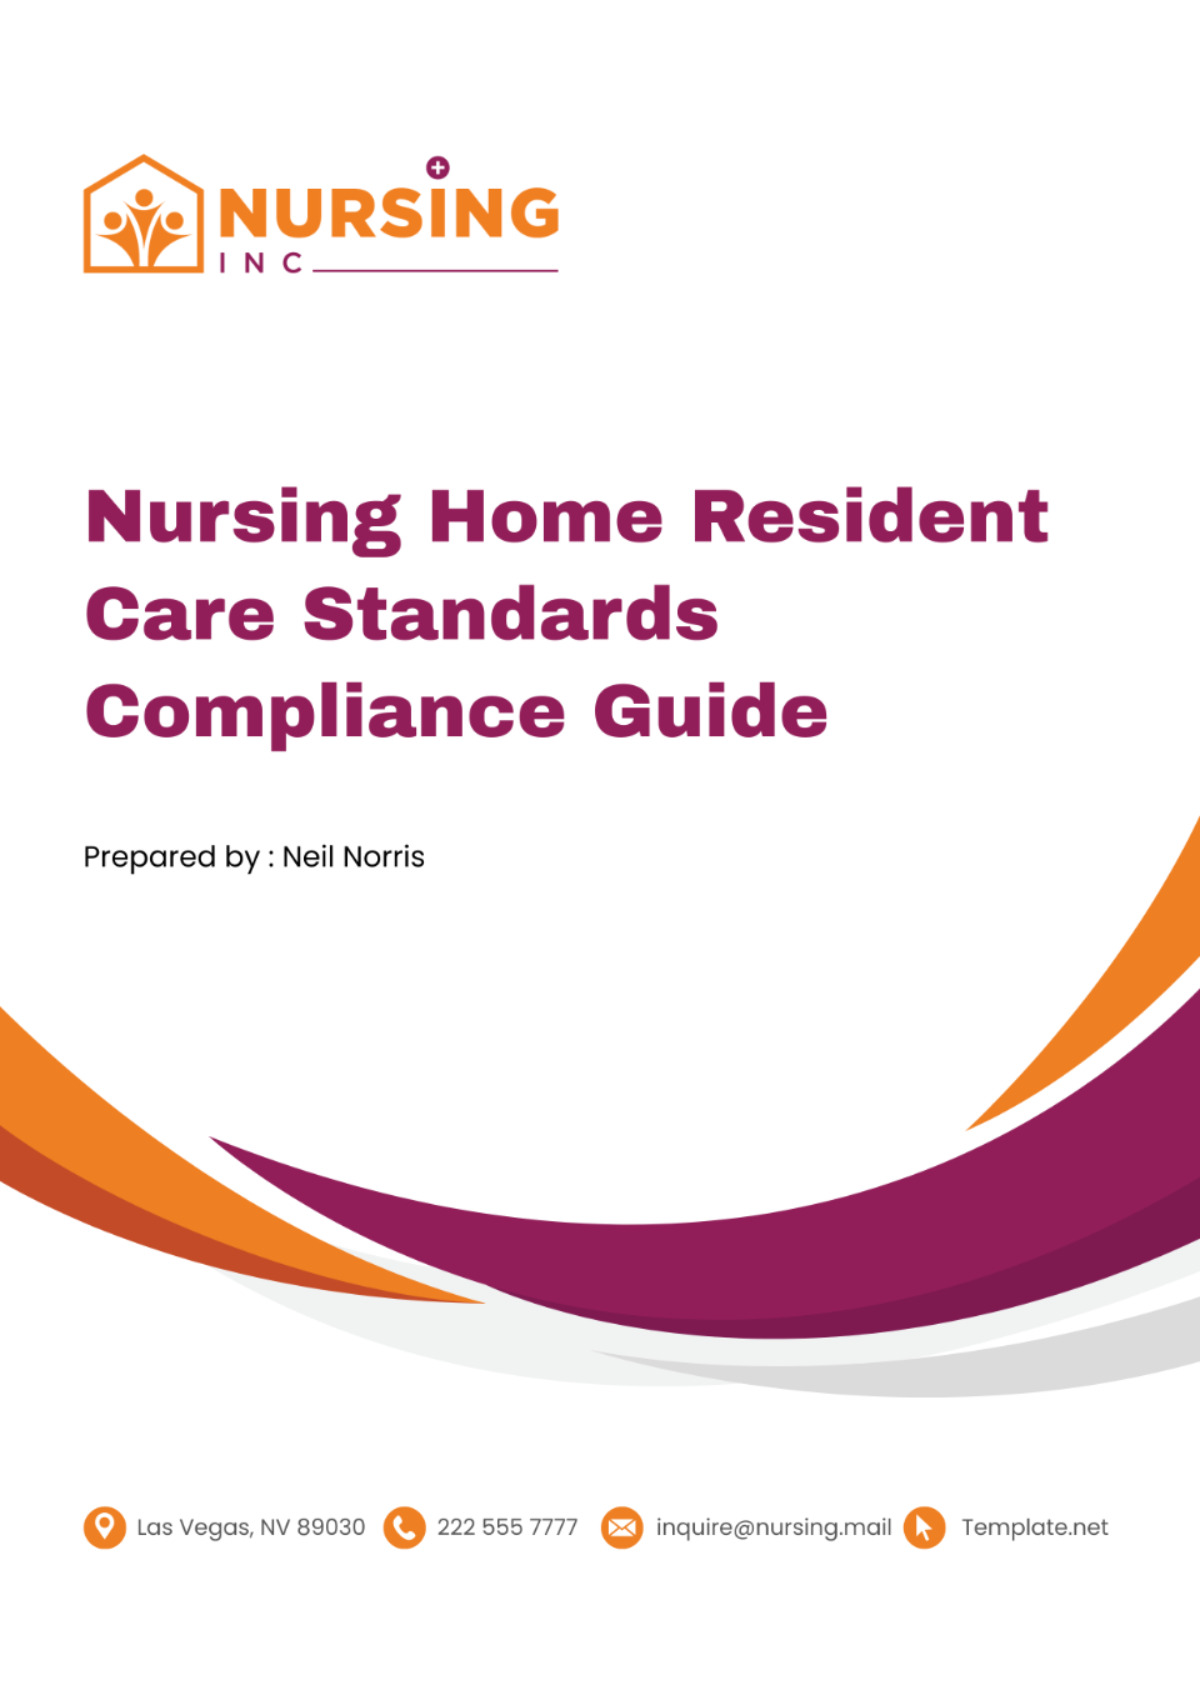 Nursing Home Resident Care Standards Compliance Guide Template